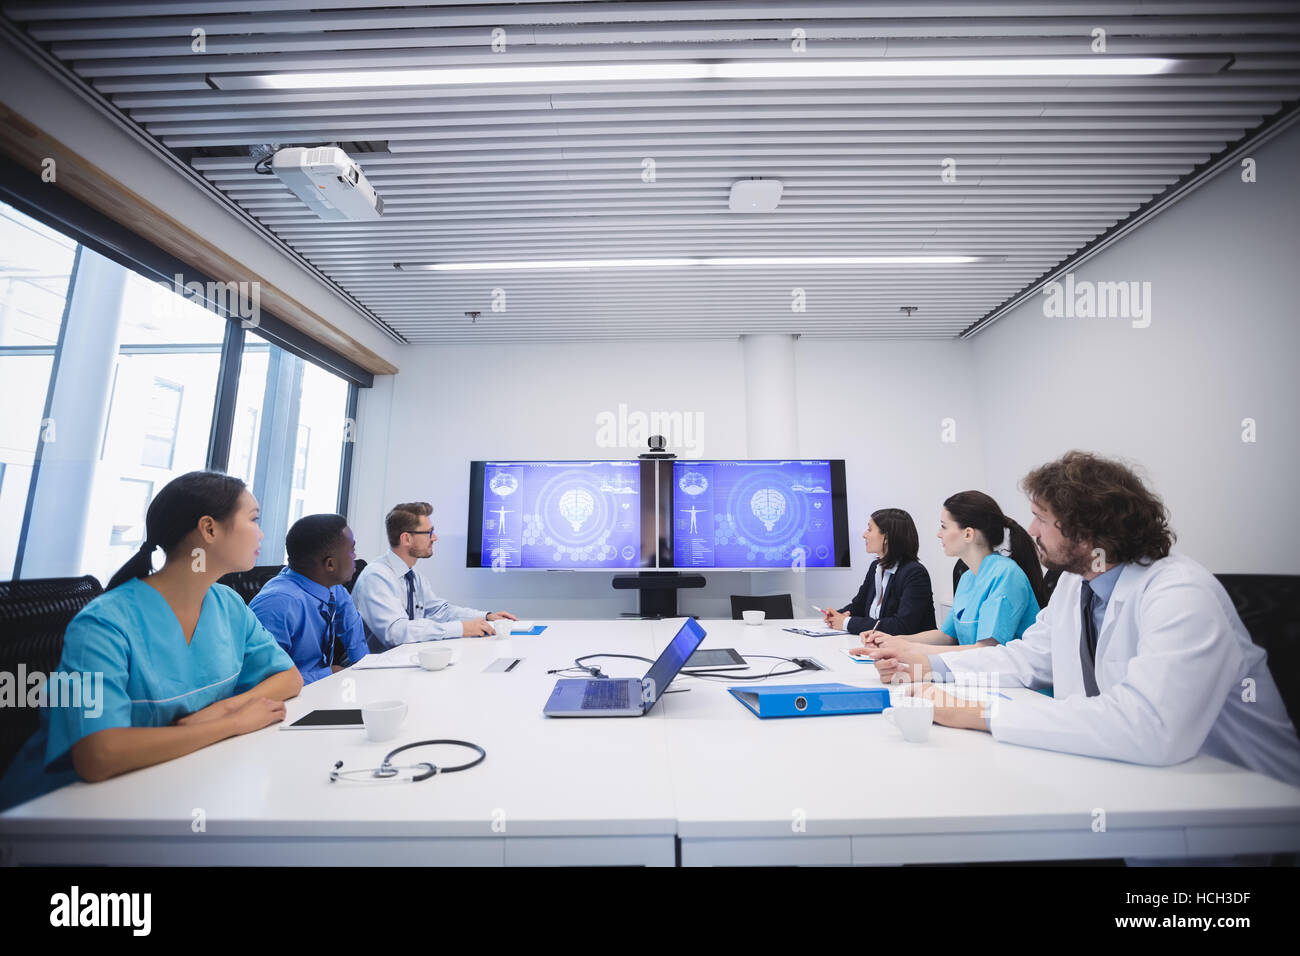 Team of doctors looking at screen in conference room Stock Photo